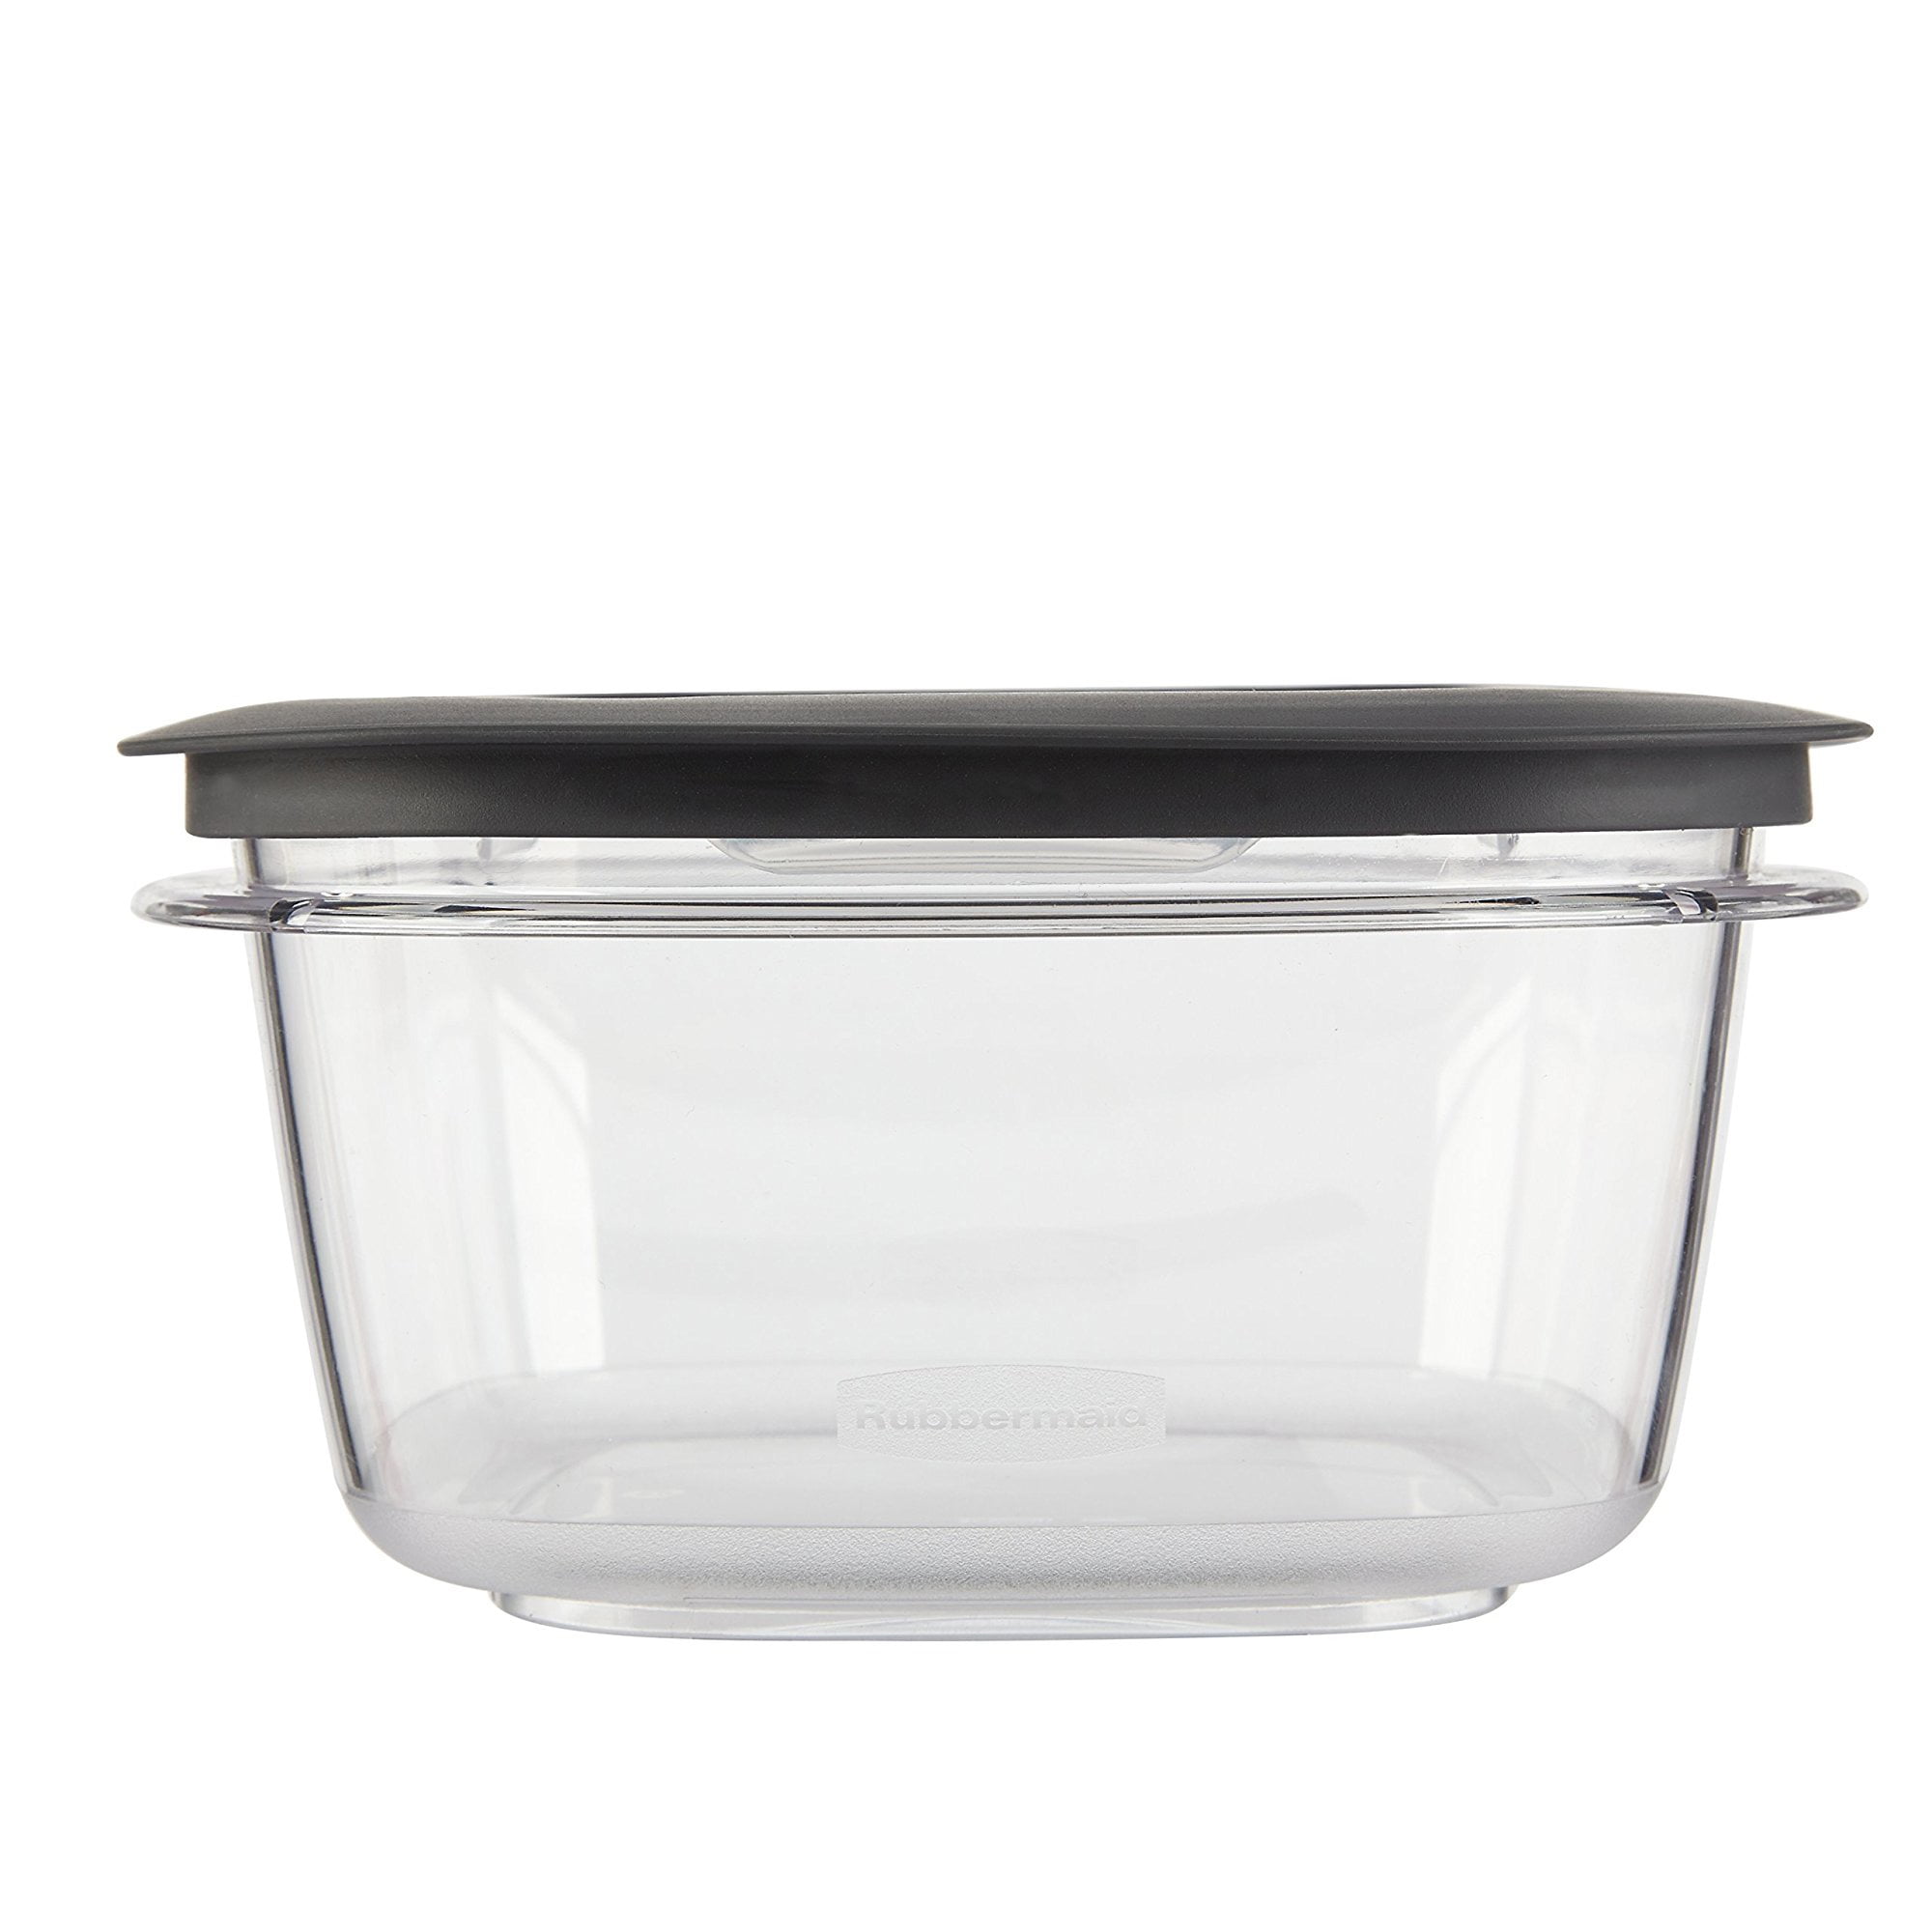  Rubbermaid Premier Easy Find Lids 5-Cup Meal Prep and Food  Storage Container, Grey